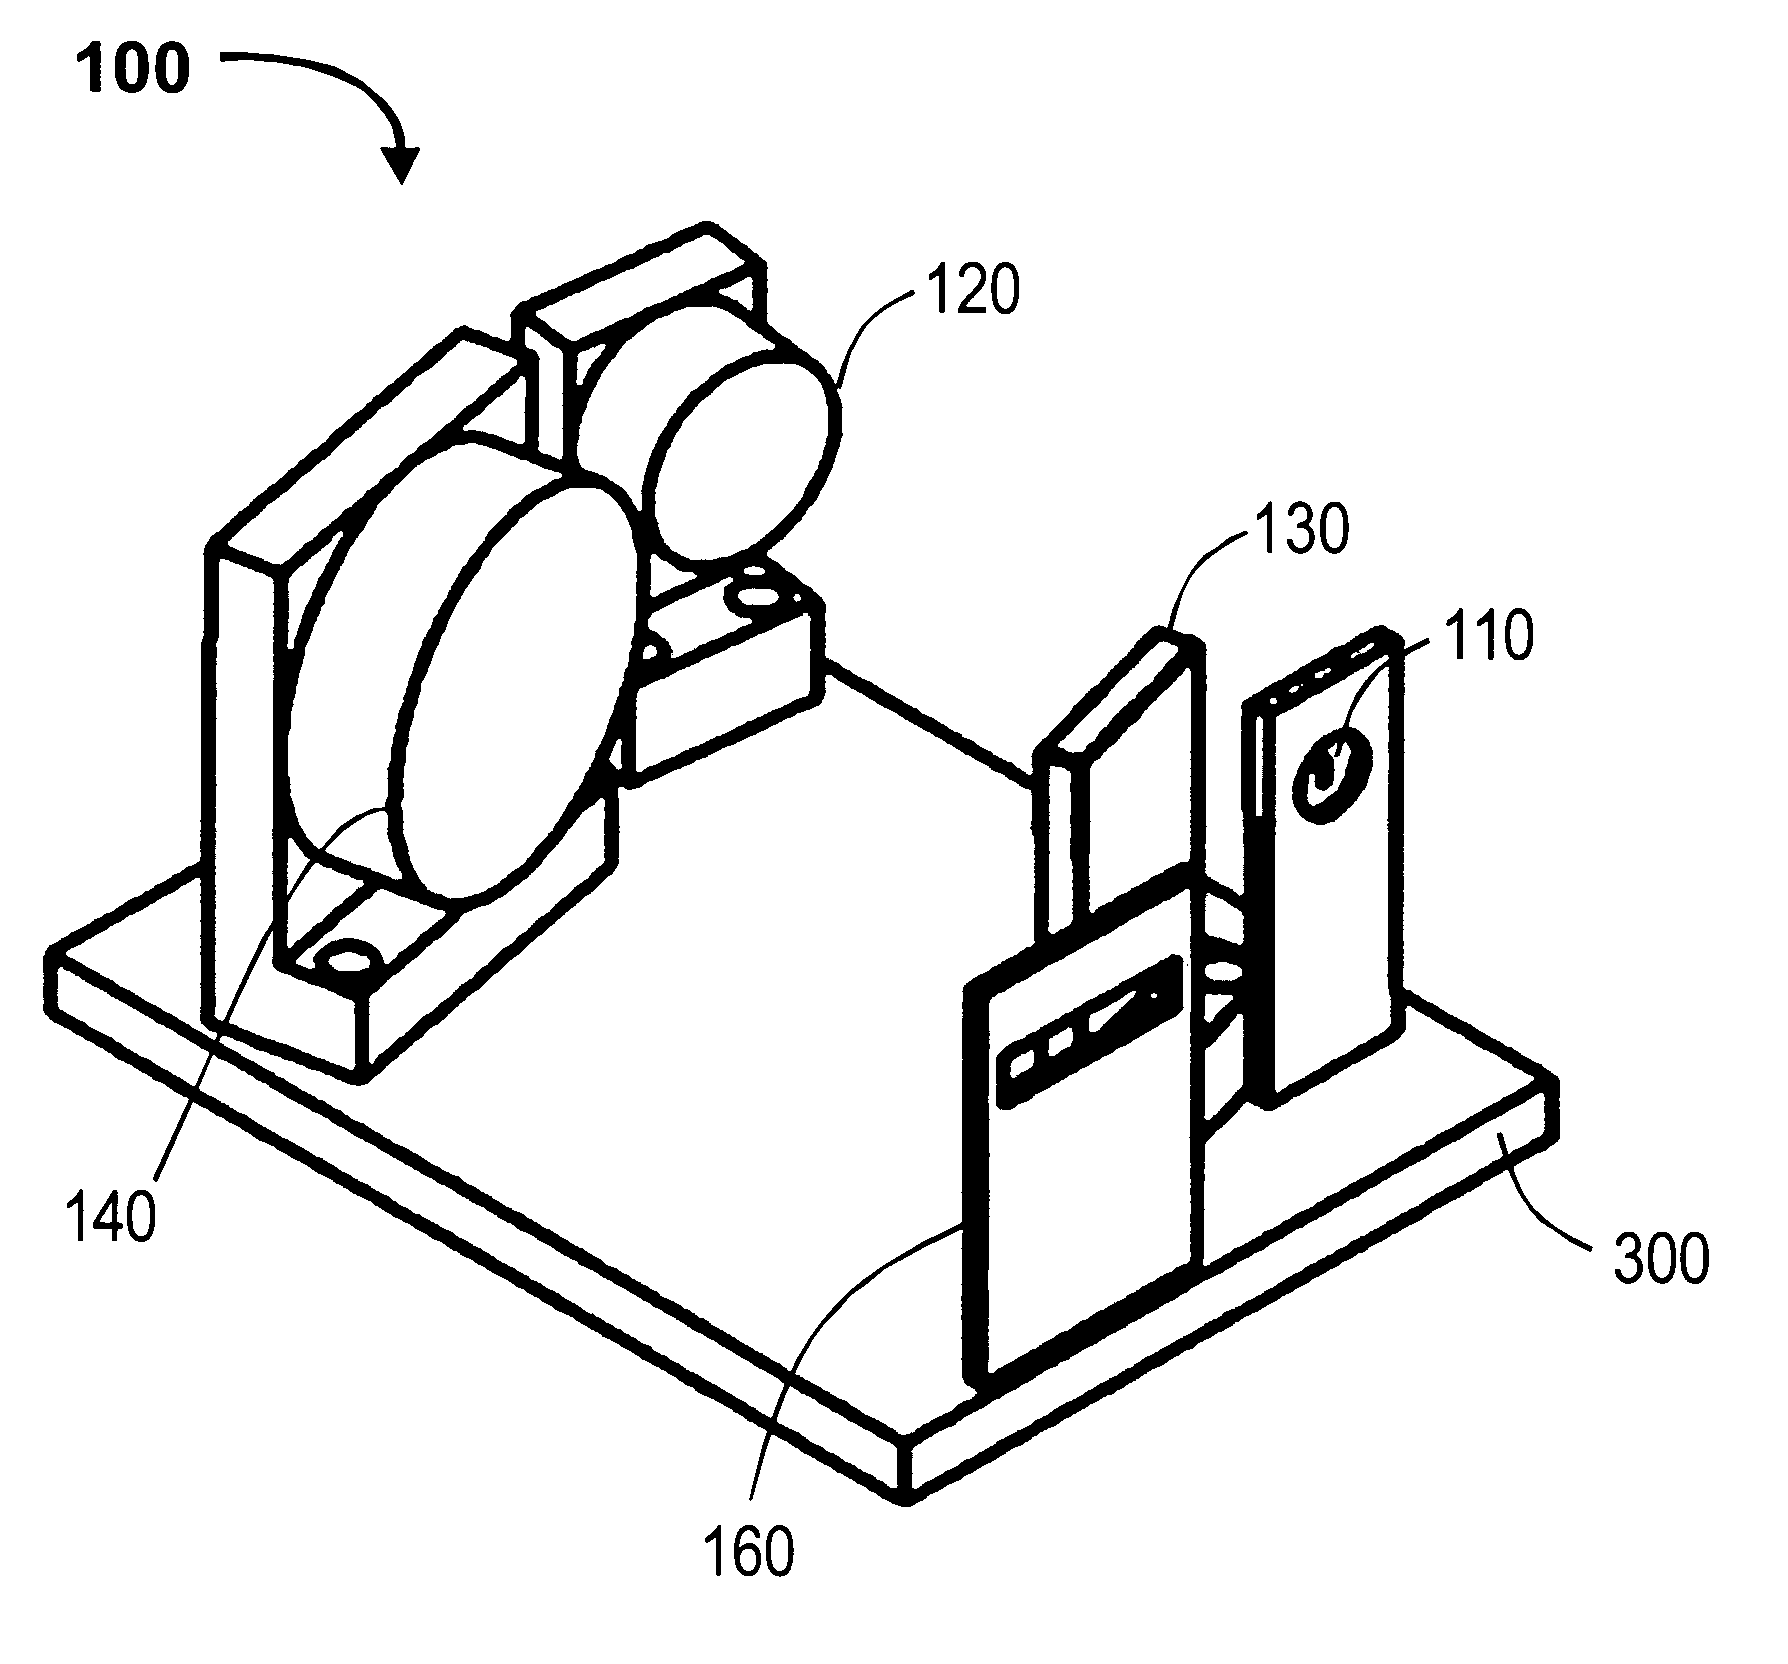 Compact infrared spectrometer, and methods and systems for manufacture and assembly of components used in same